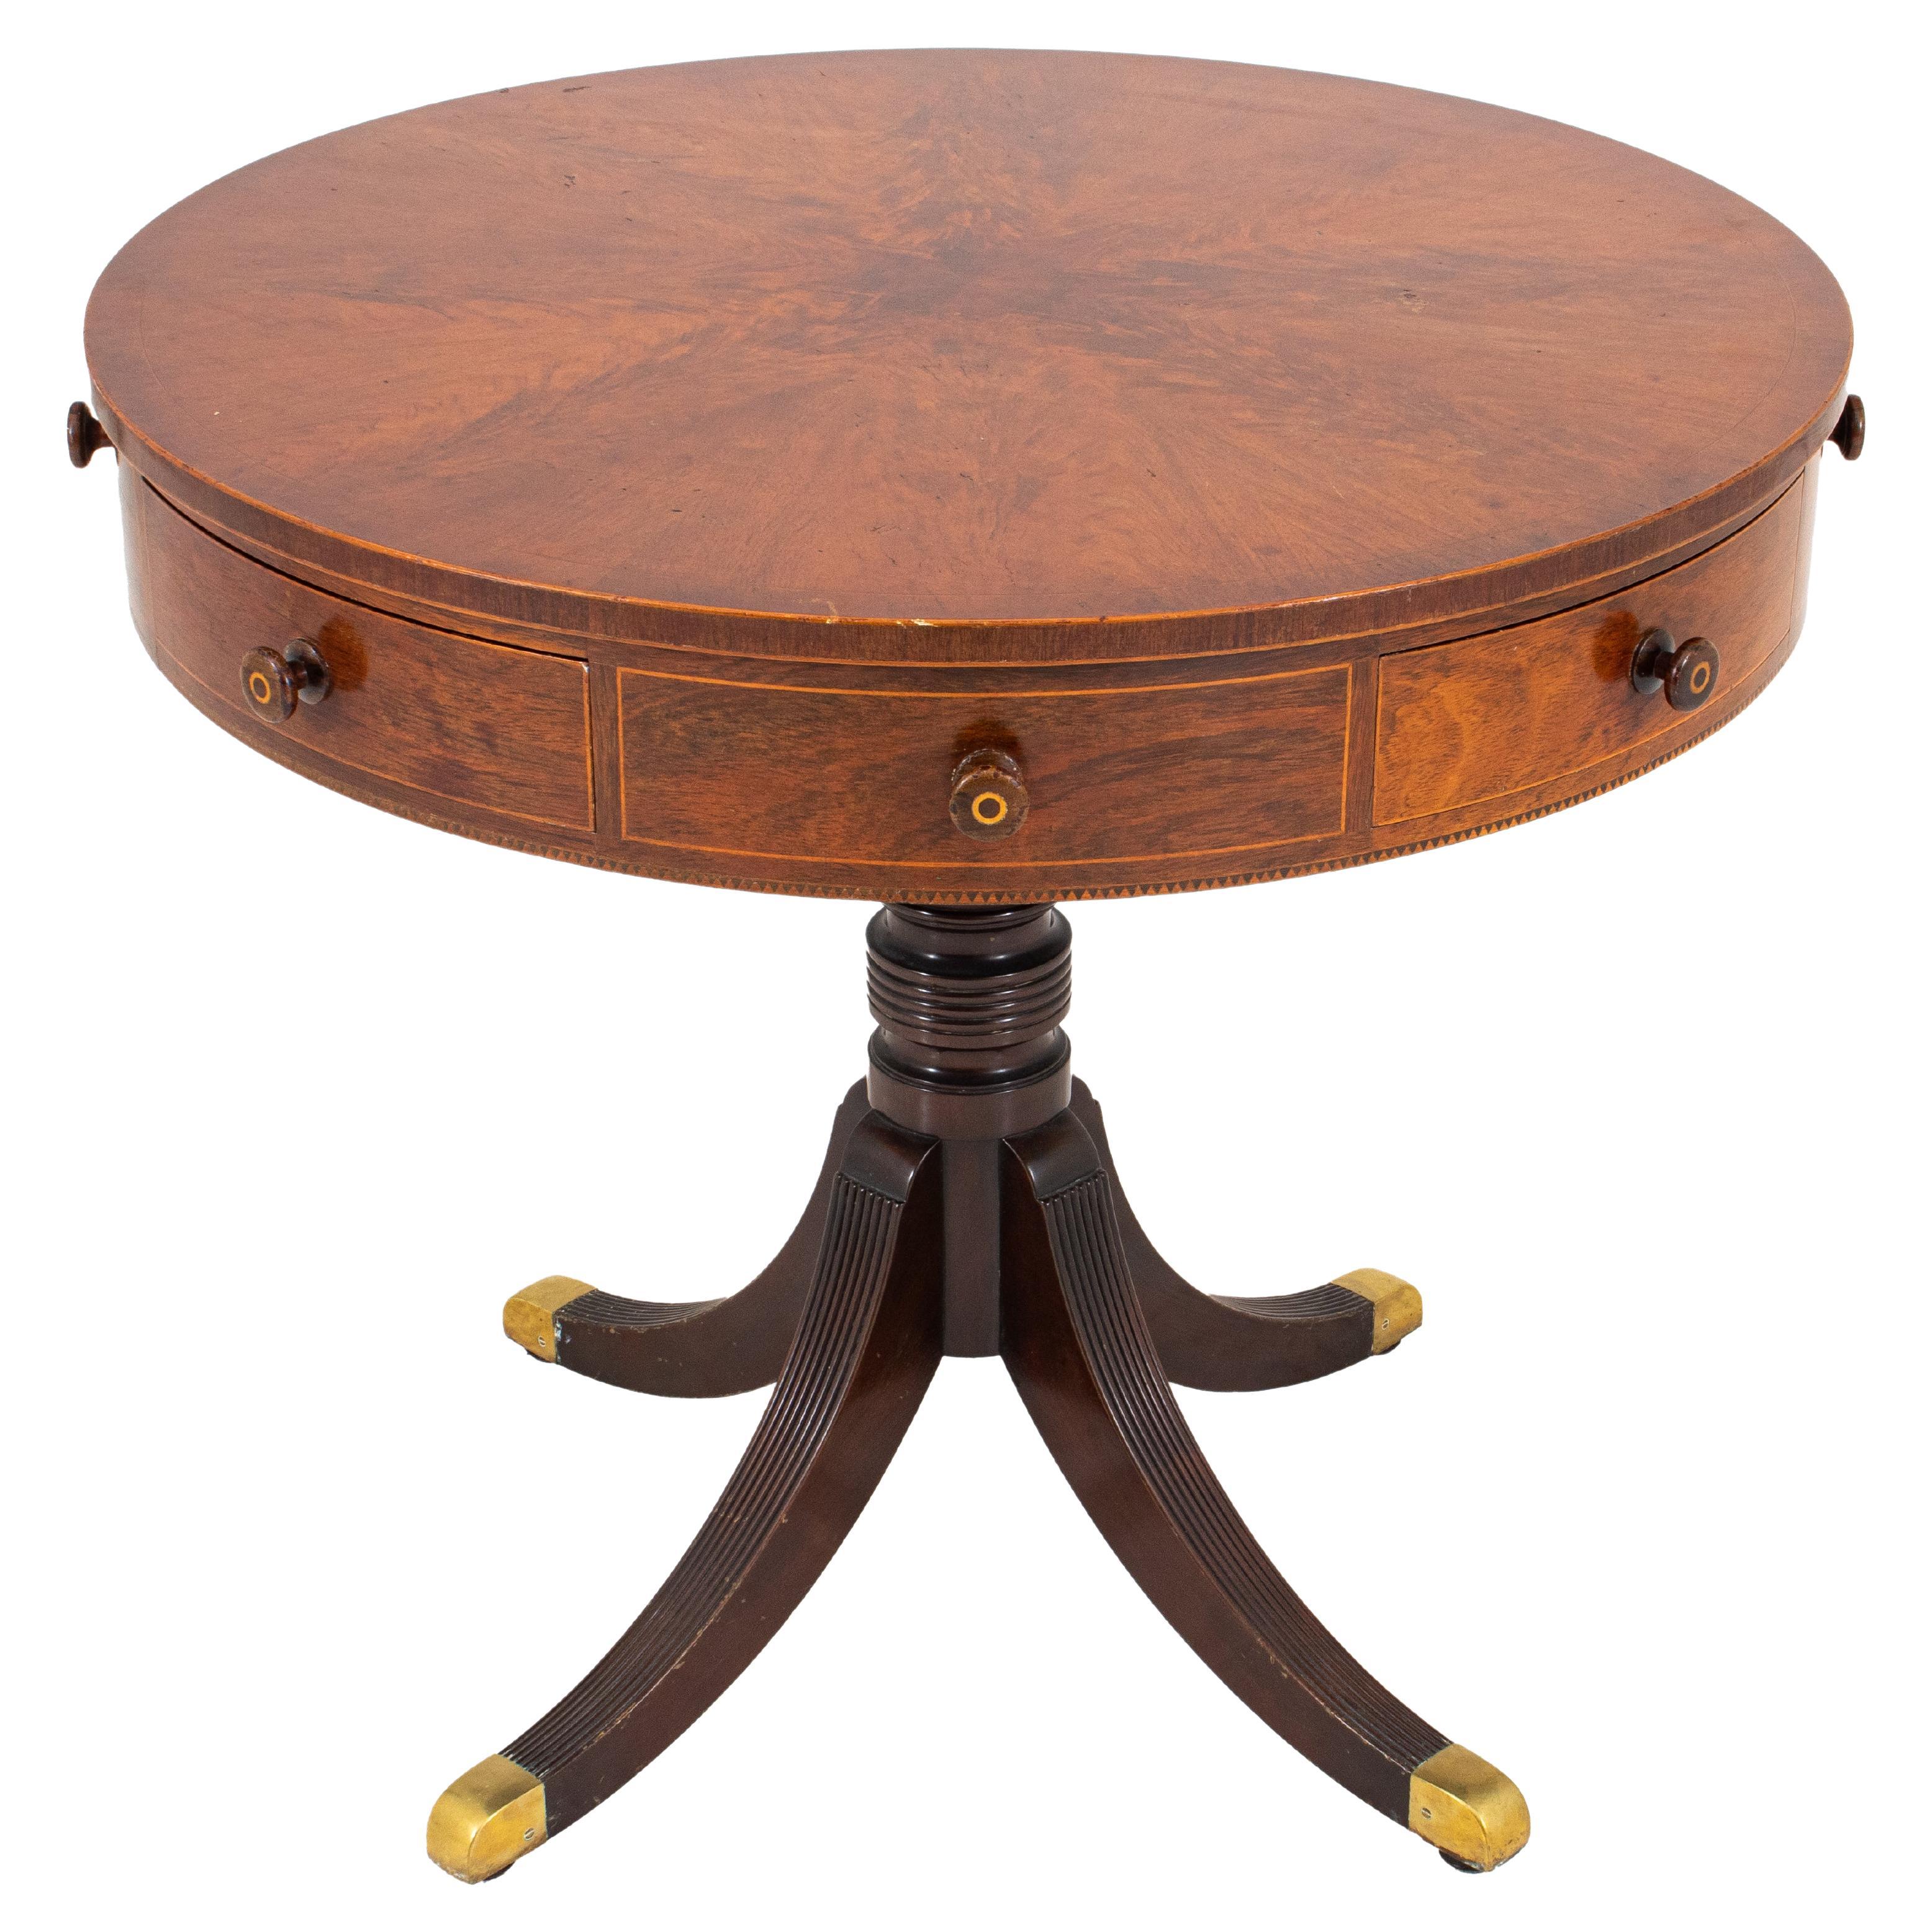 Regency Style Mahogany Rent or Drum Table